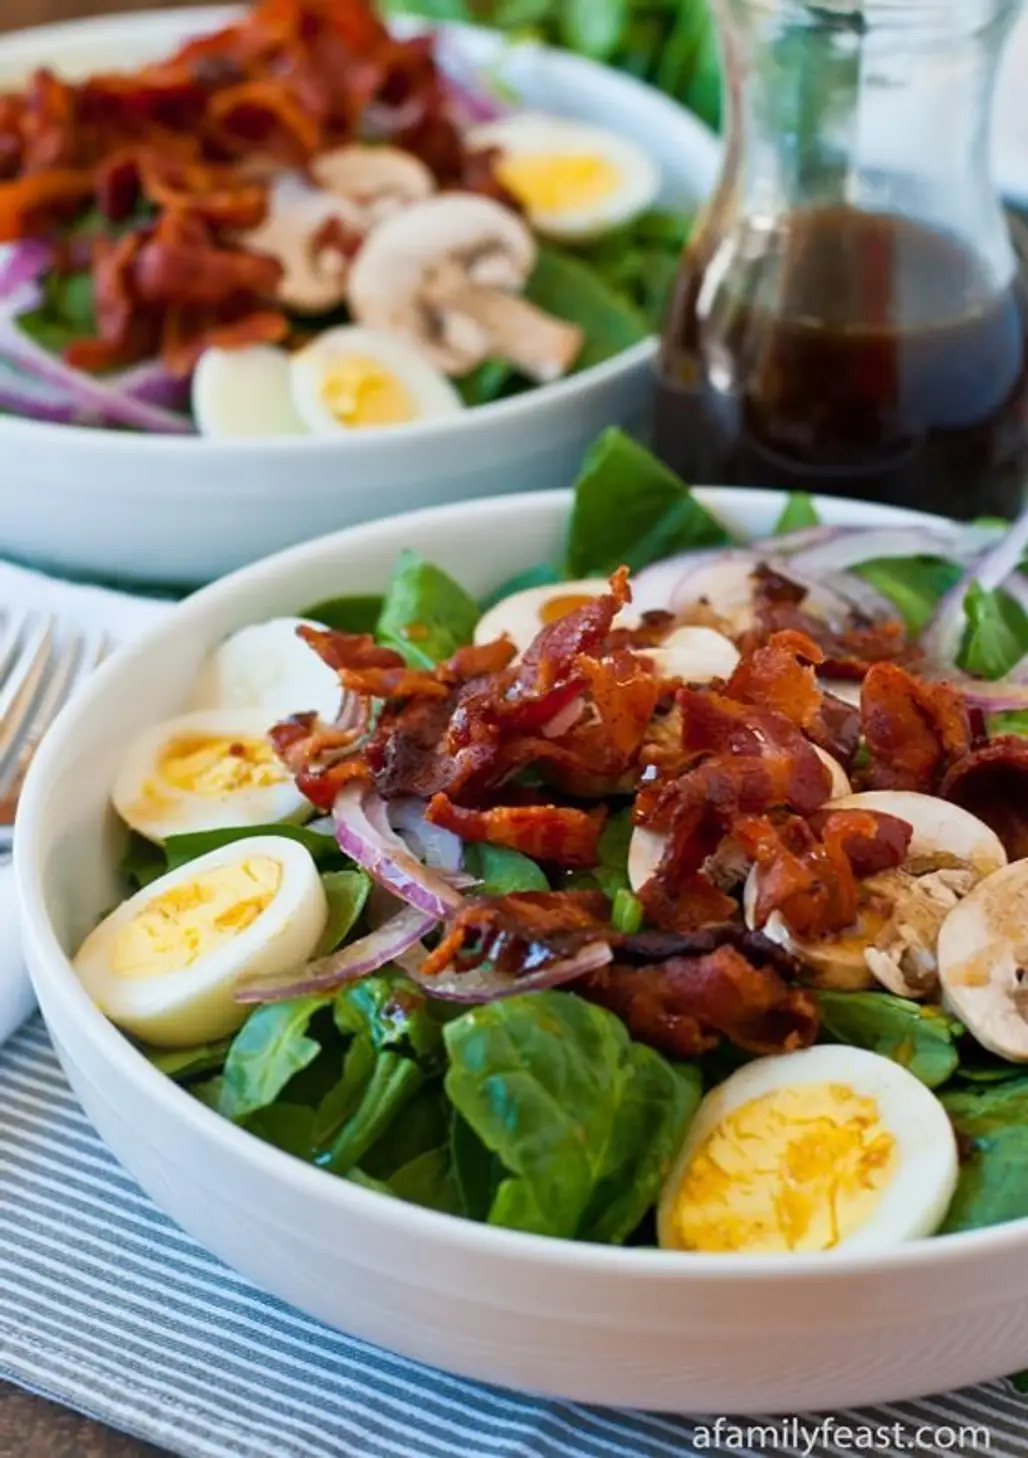 How to Make 42 Warm Salads That Make Your Taste Buds Sing ...